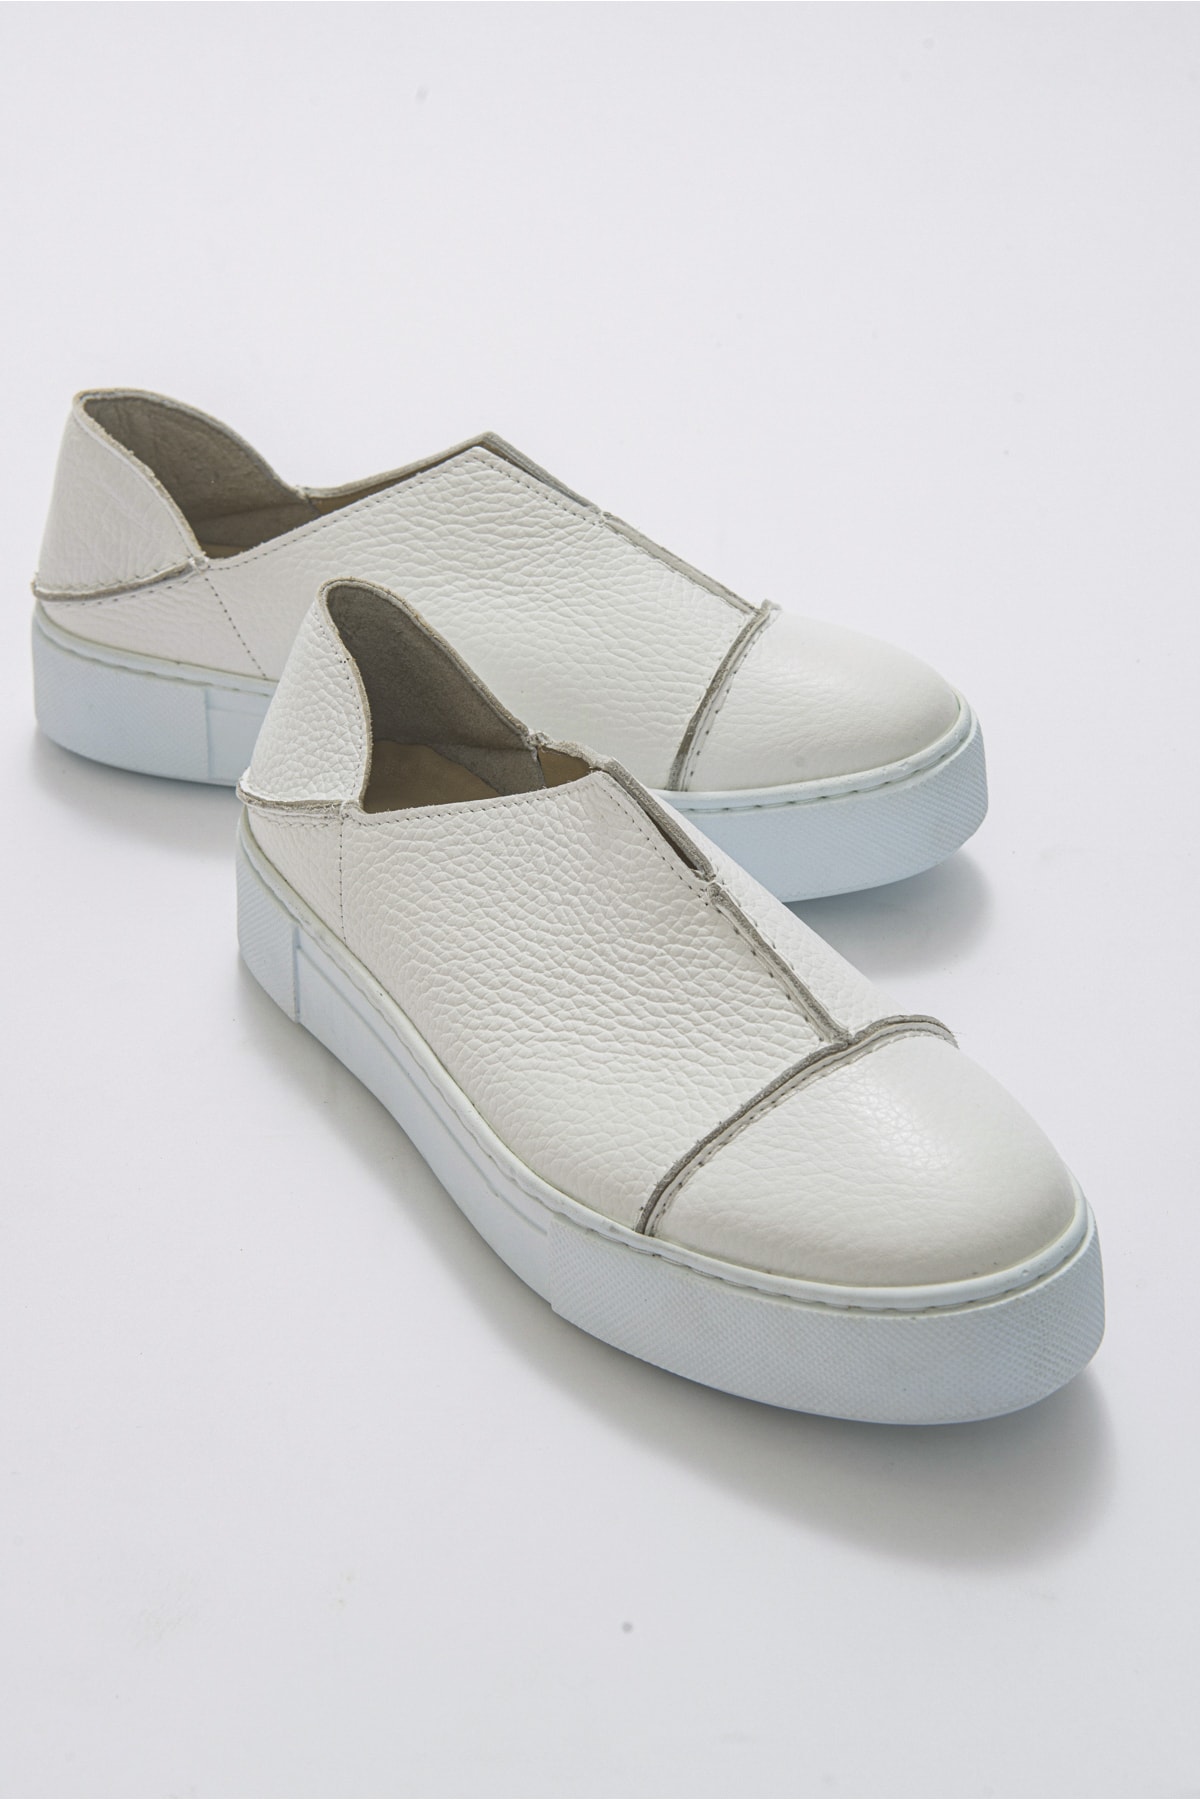 LuviShoes 100 White Leather Women's Sneakers